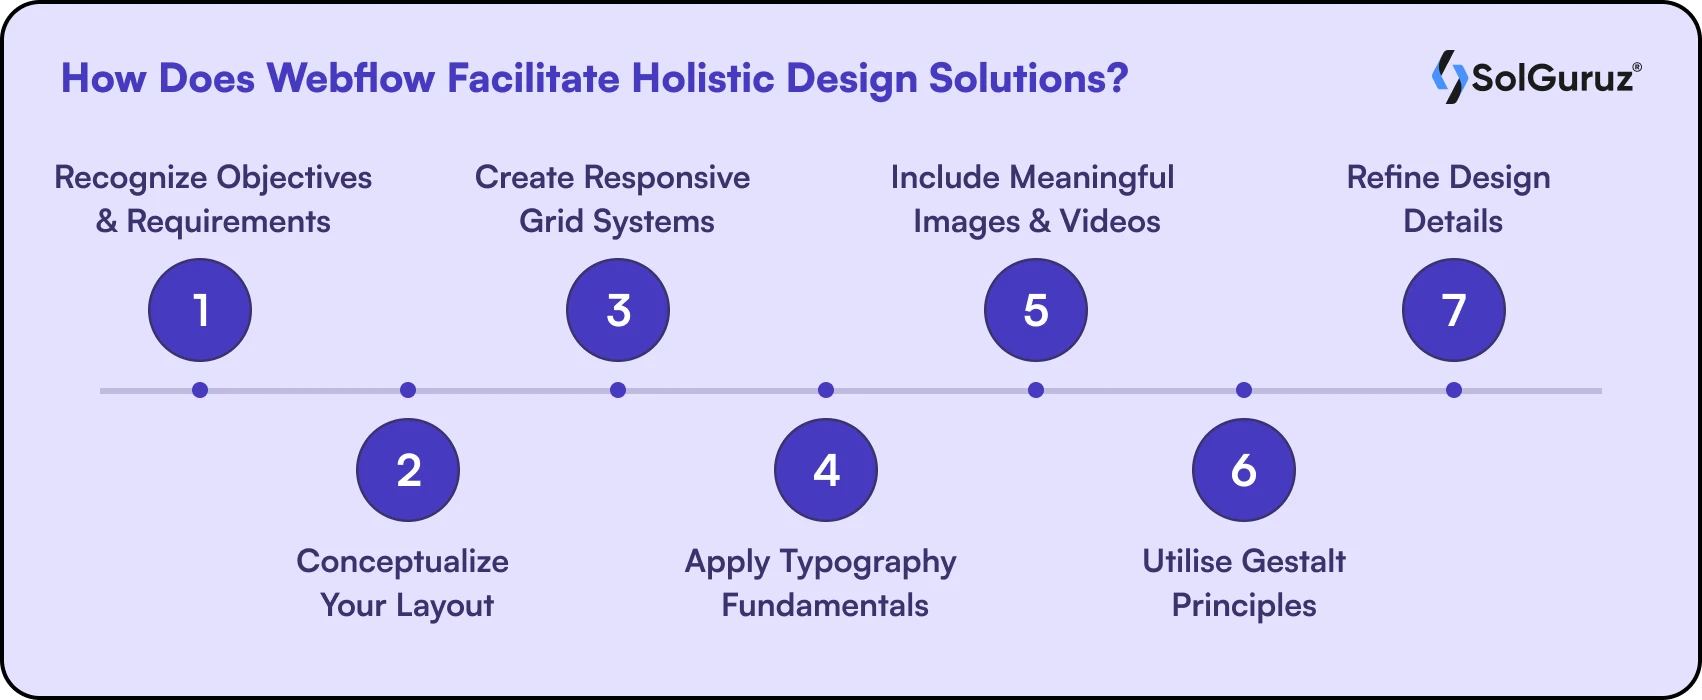 How Does Webflow Facilitate Holistic Design Solutions